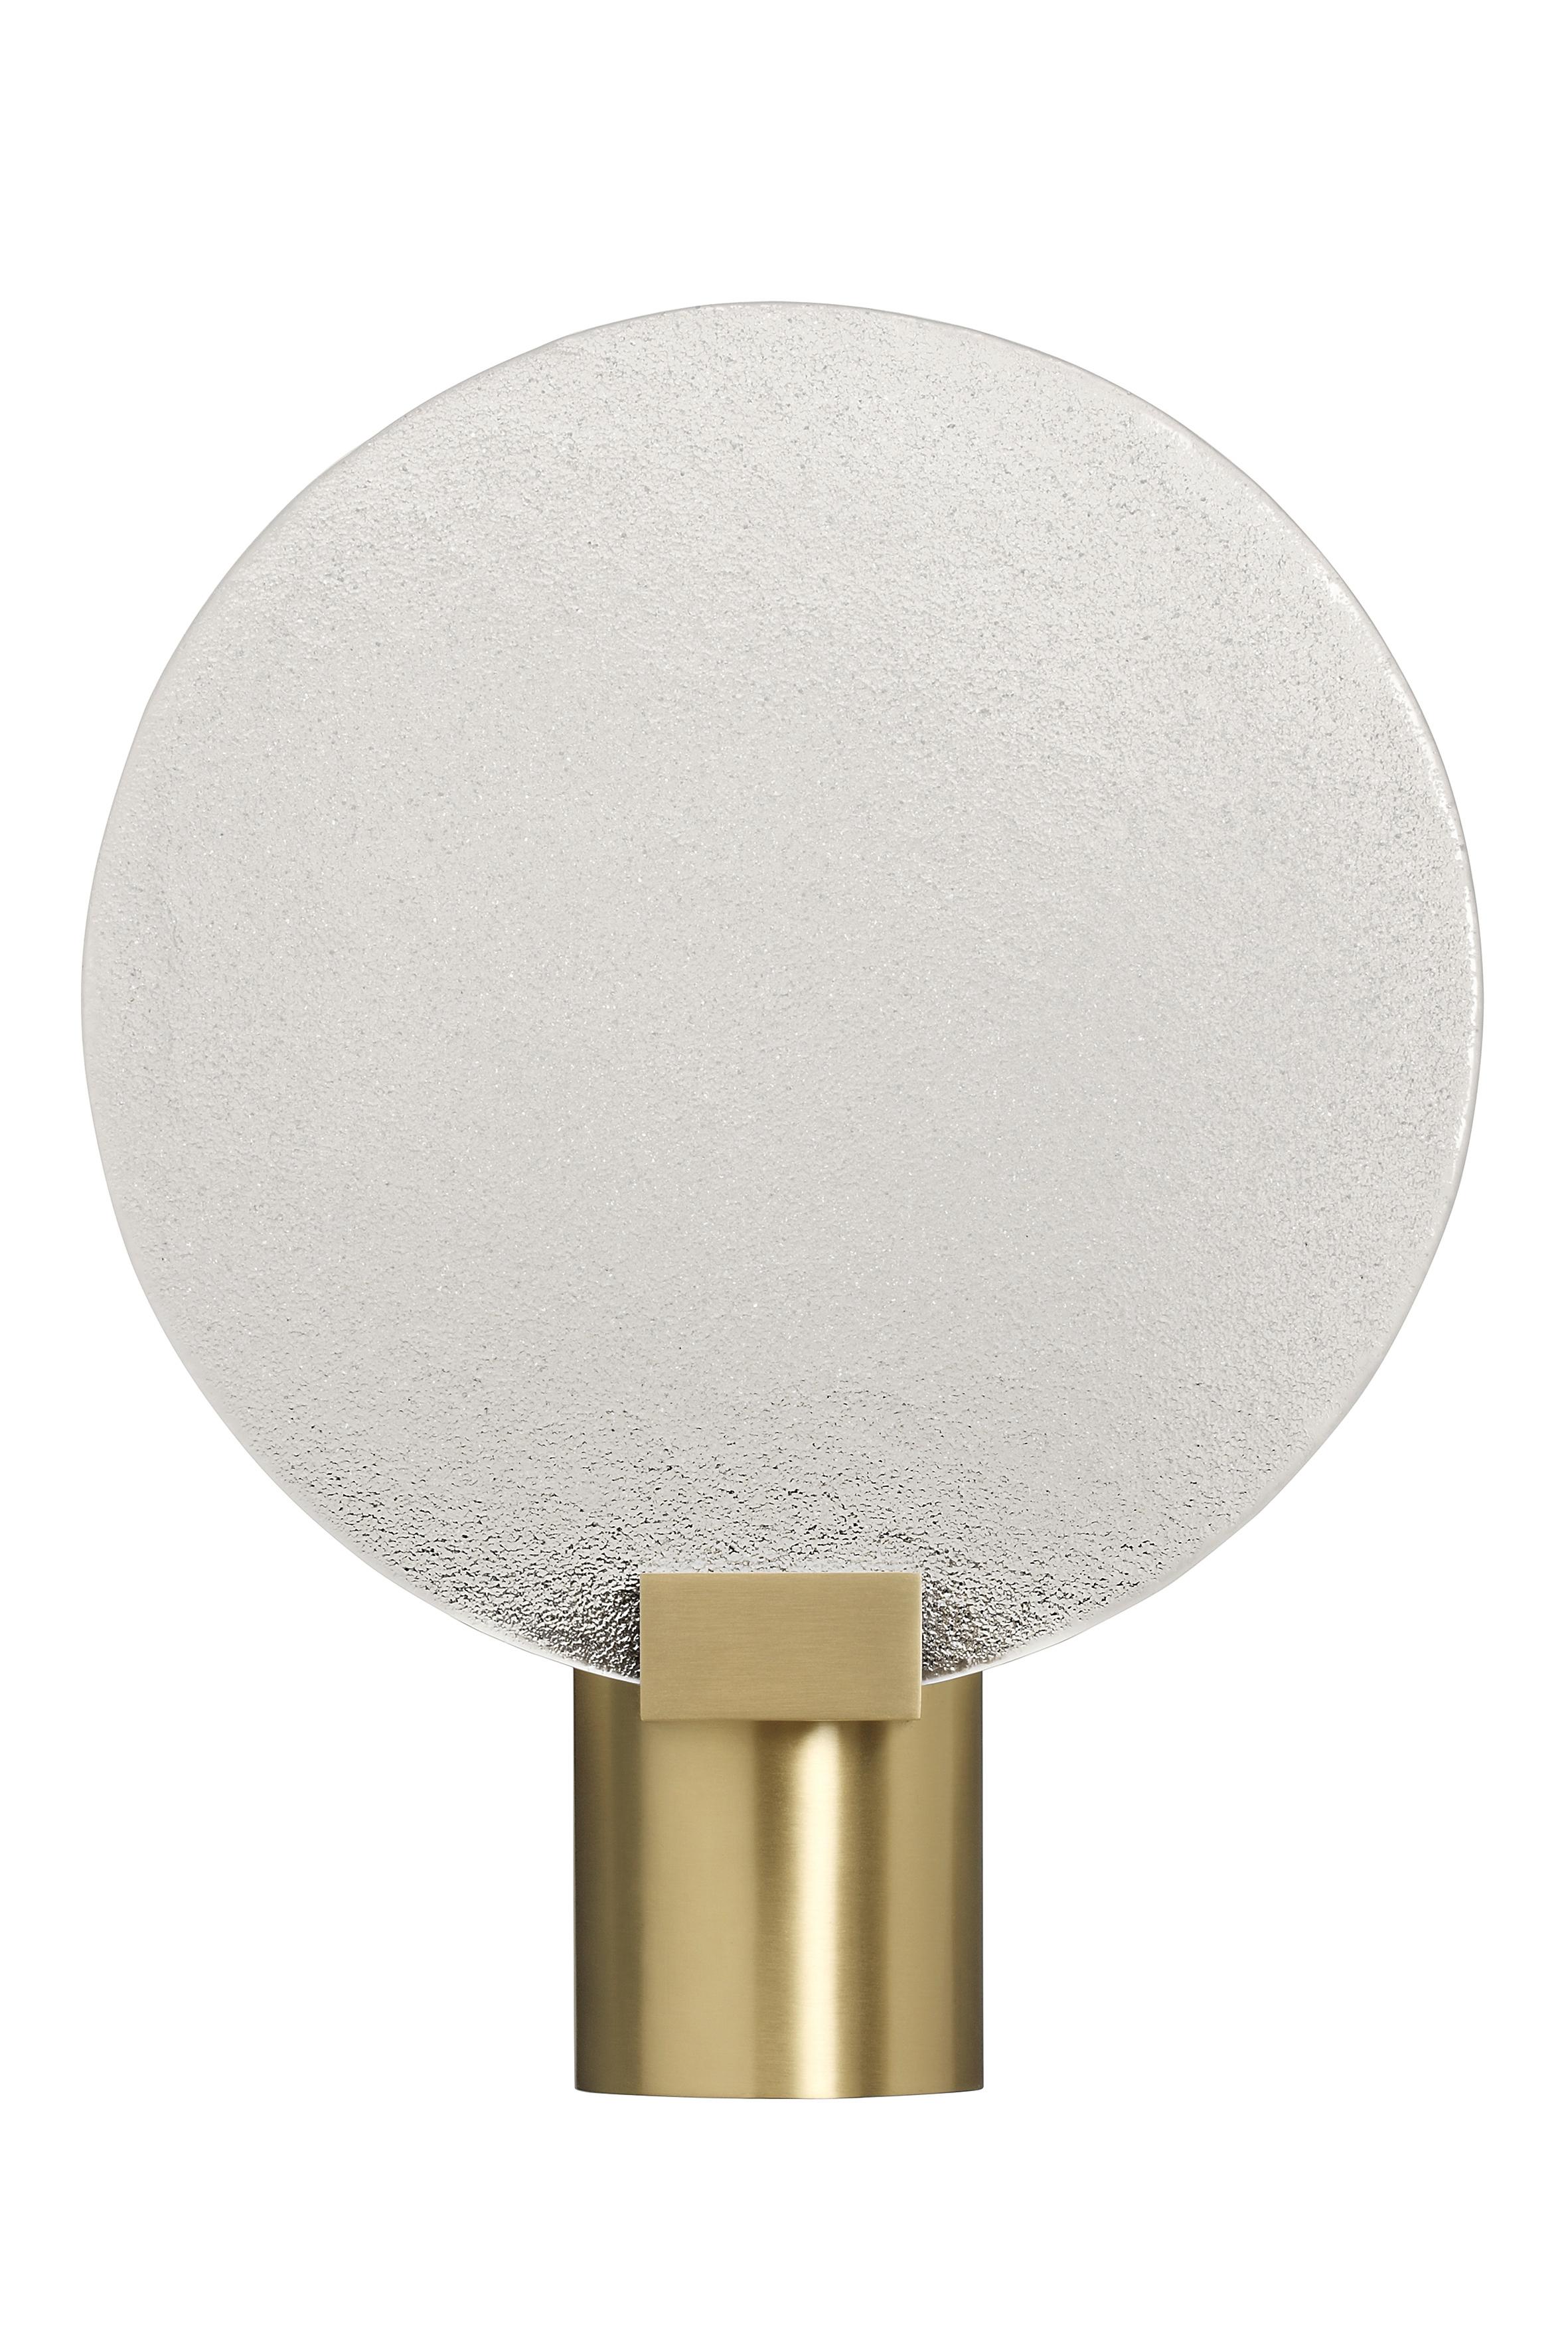 Nimbus wall-mount lamp by CTO Lighting
Materials: satin brass with handmade glass
Also available in bronze with handmade glass
Dimensions: H 32 x W 25 cm 

All our lamps can be wired according to each country. If sold to the USA it will be